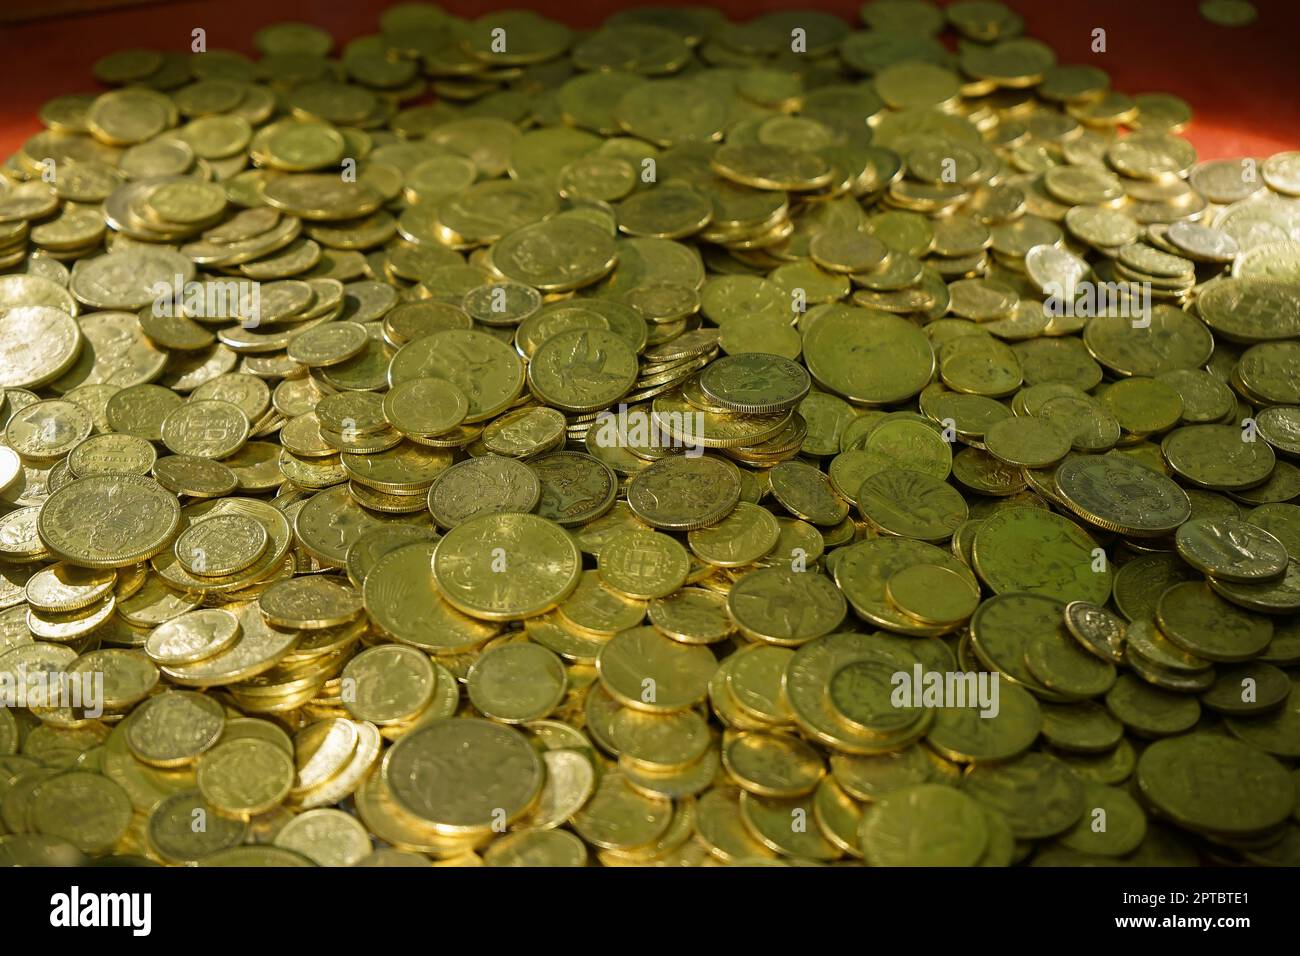 Coin Balance, 1790-1810. Maker: Thomas Beach (Birmingham). Scales for  weighing coins Stock Photo - Alamy